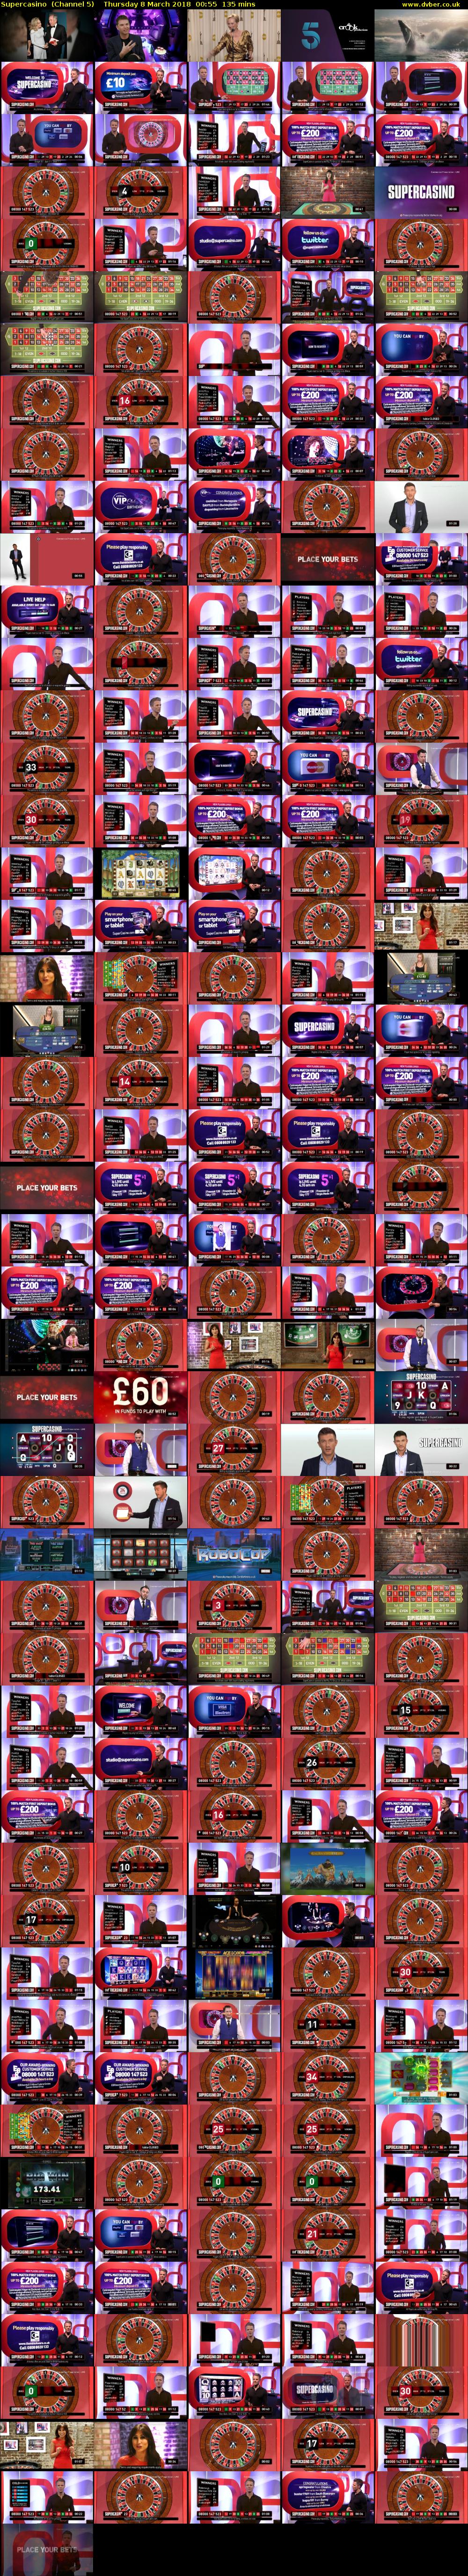 Supercasino  (Channel 5) Thursday 8 March 2018 00:55 - 03:10